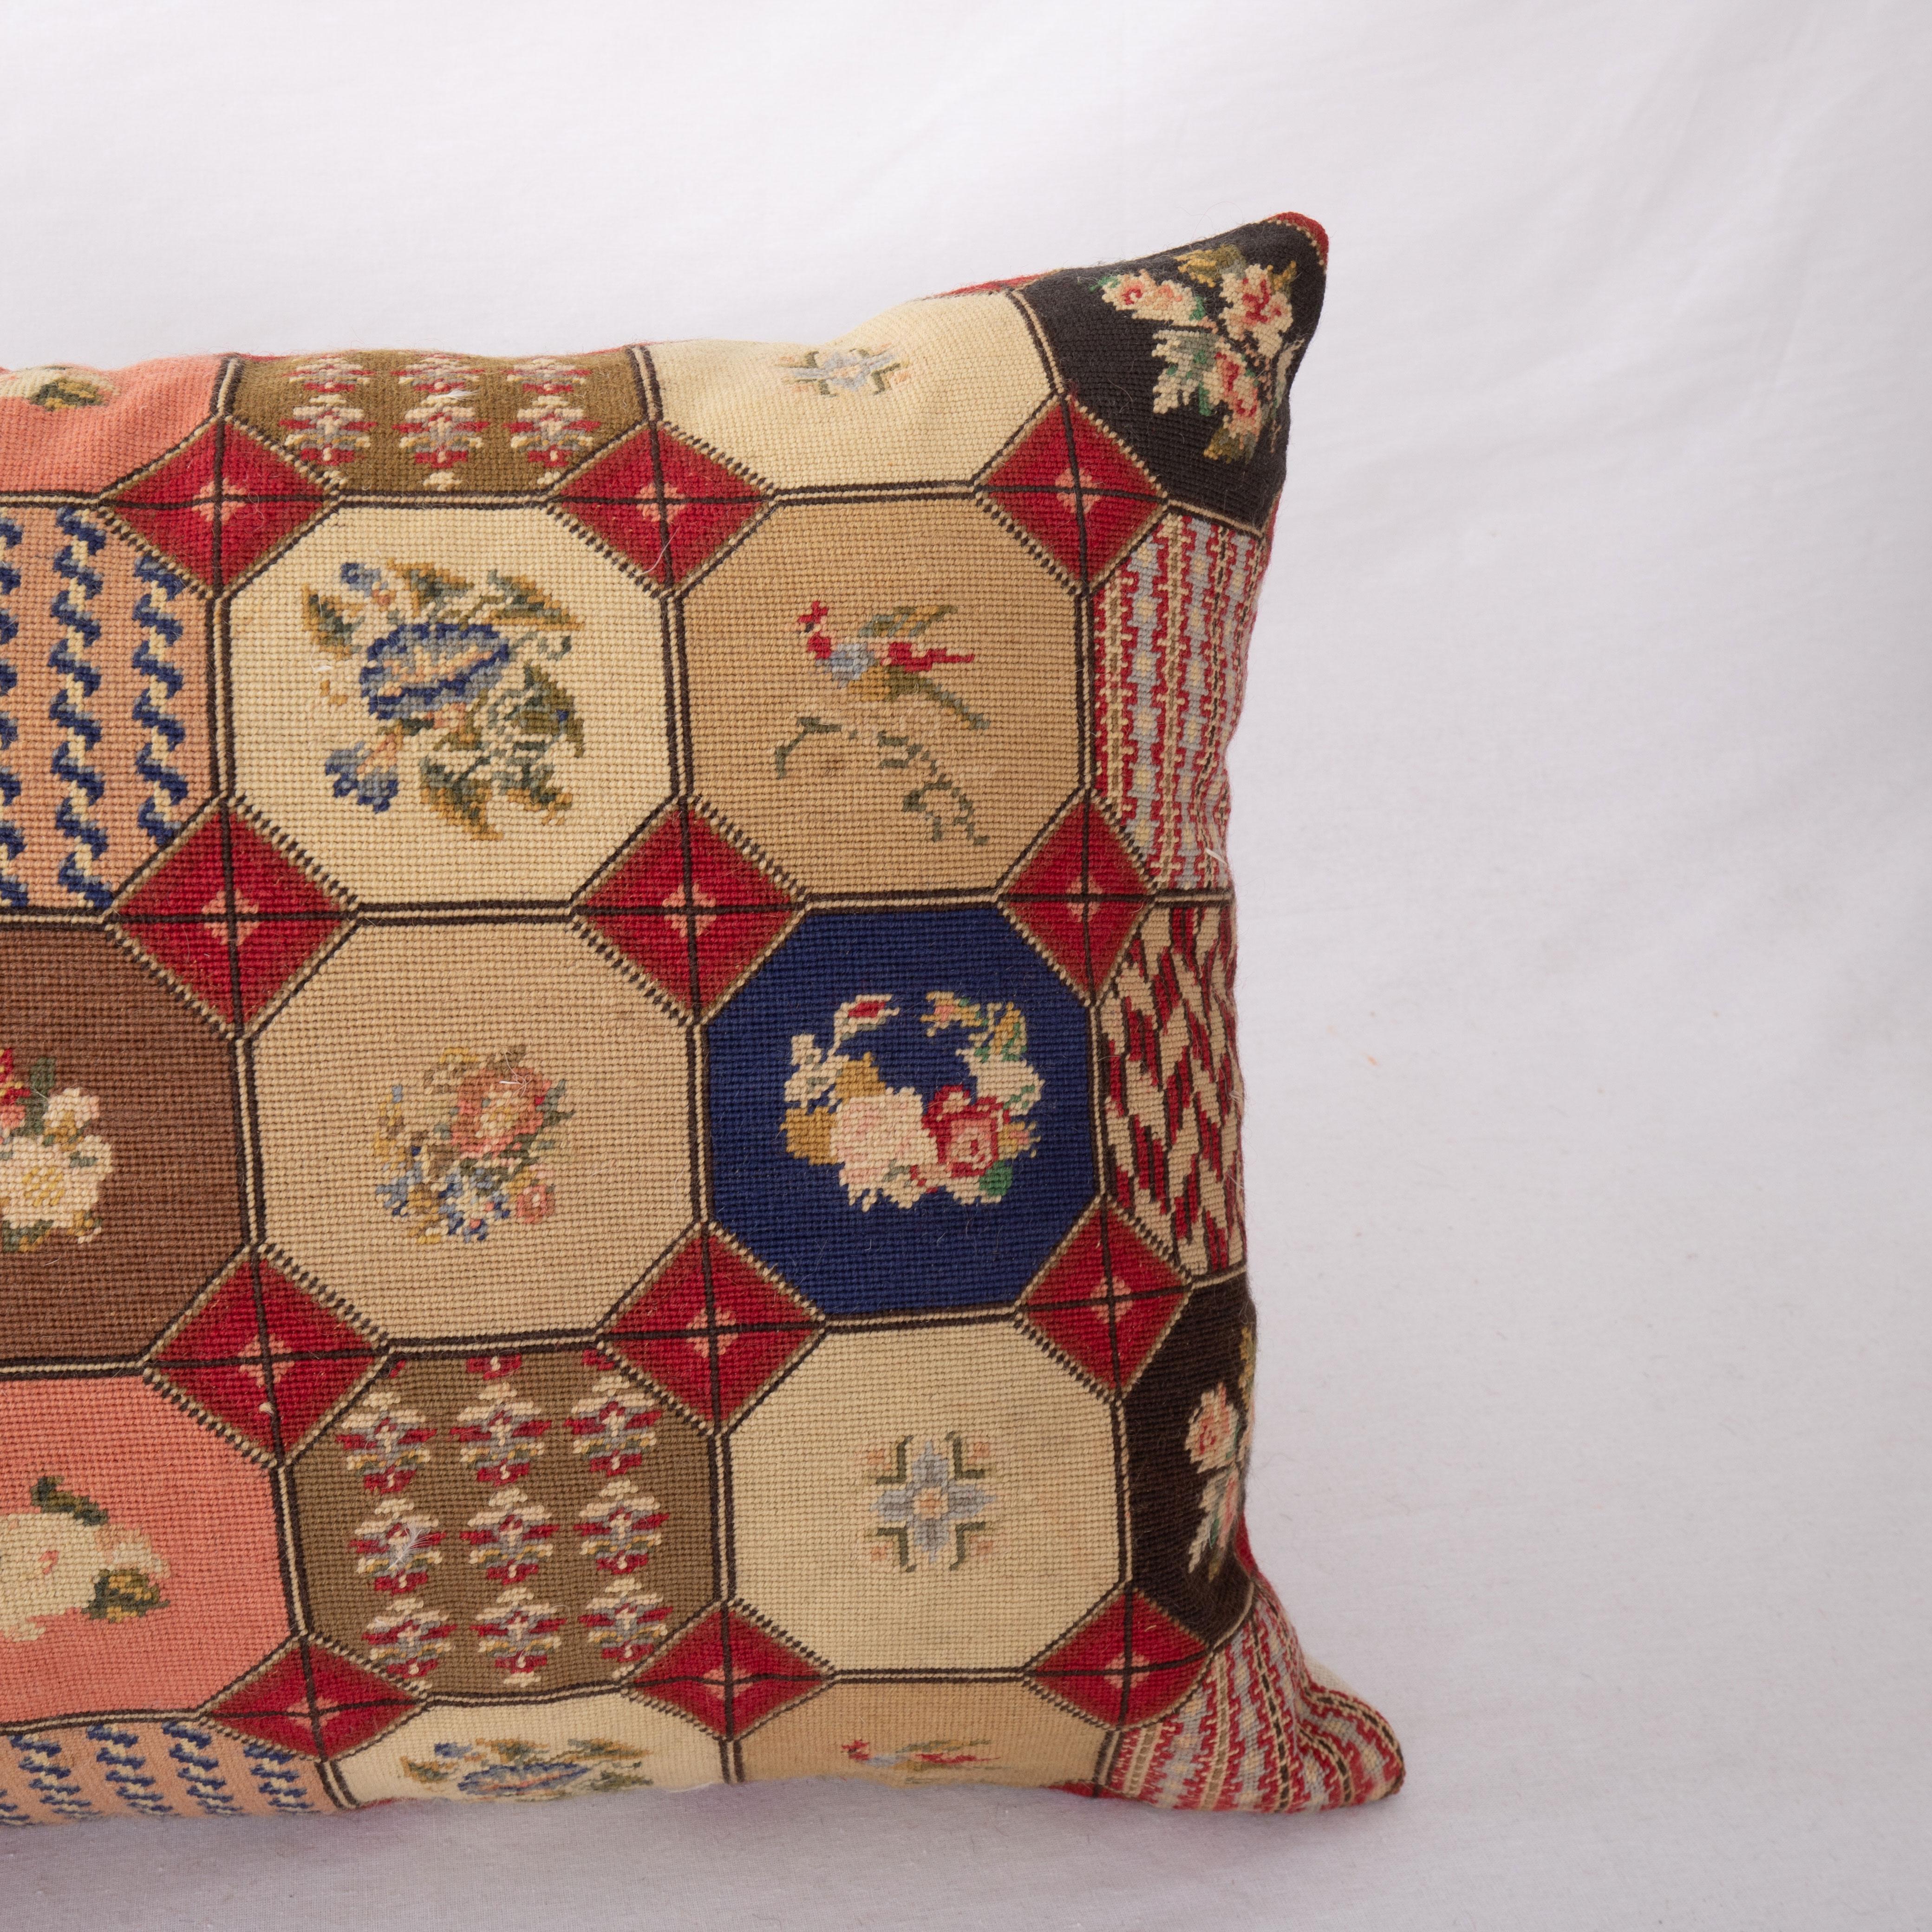 Embroidered Pillow Cover Made from an Antique Petit Point European Embroidery Early 20th C.